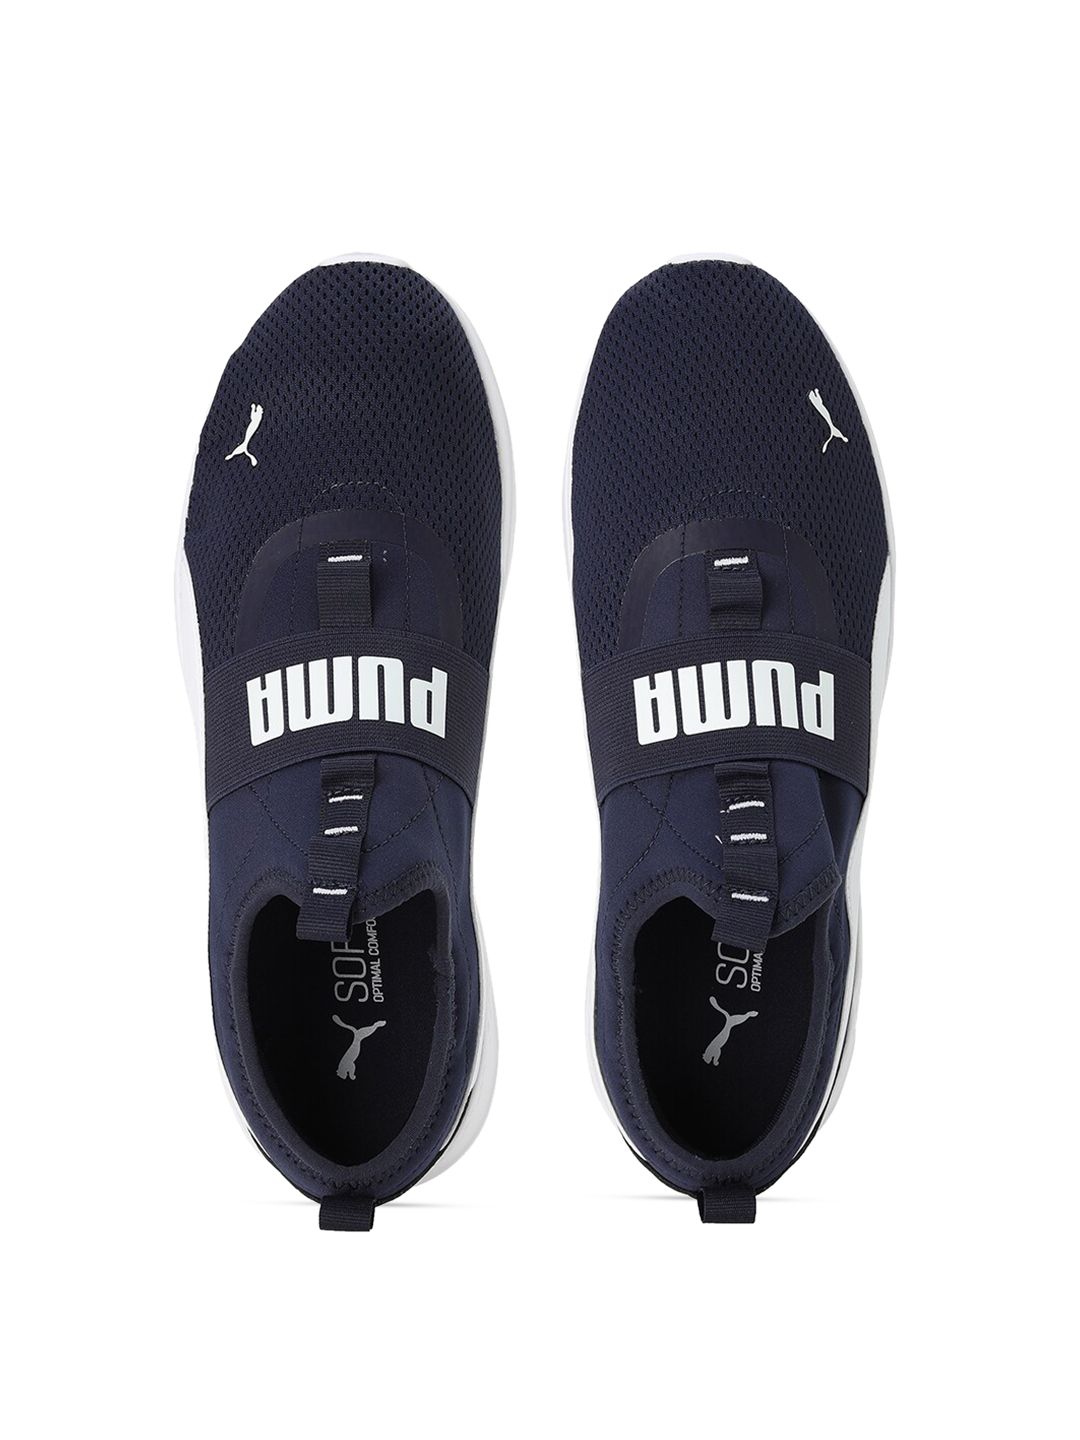 Puma Unisex Blue Sports Shoes Price in India